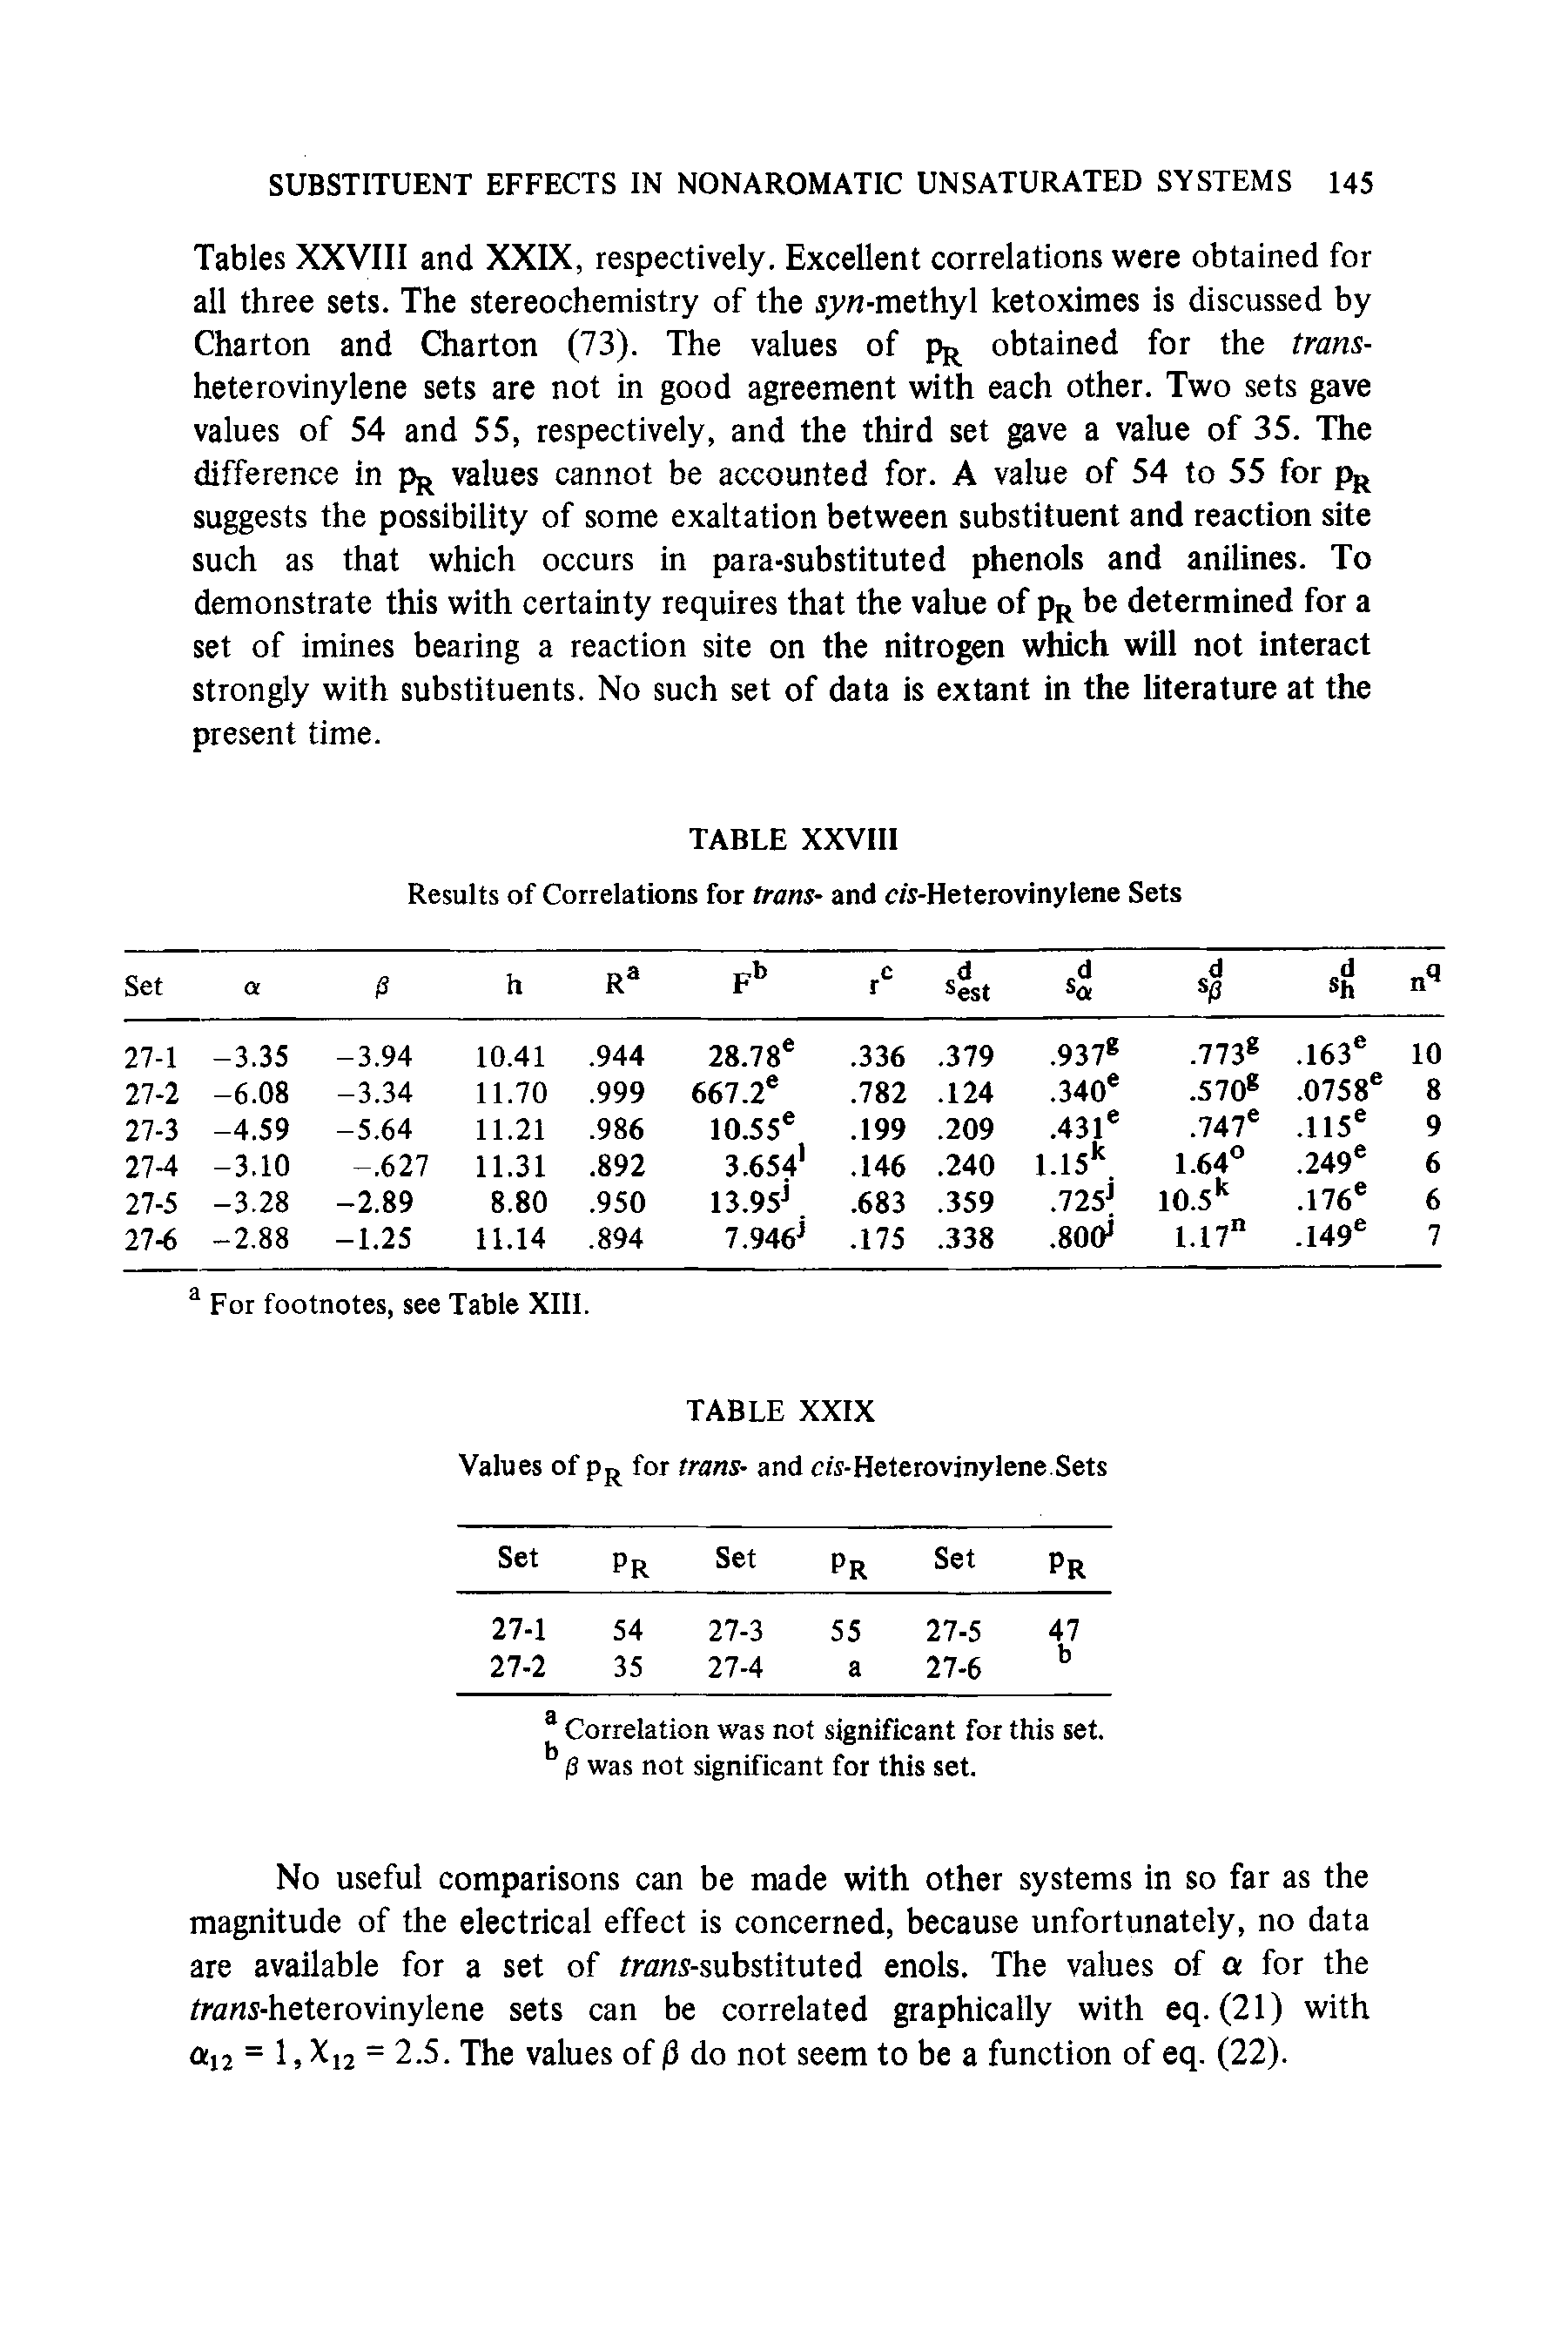 Tables XXVIII and XXIX, respectively. Excellent correlations were obtained for all three sets. The stereochemistry of the sy -methyl ketoximes is discussed by Charton and Charton (73). The values of pj obtained for the trans-heterovinylene sets are not in good agreement with each other. Two sets gave values of 54 and 55, respectively, and the third set gave a value of 35. The difference in pj values cannot be accounted for. A value of 54 to 55 for pj suggests the possibility of some exaltation between substituent and reaction site such as that which occurs in para-substituted phenols and anilines. To demonstrate this with certainty requires that the value of pj be determined for a set of imines bearing a reaction site on the nitrogen which will not interact strongly with substituents. No such set of data is extant in the literature at the present time.